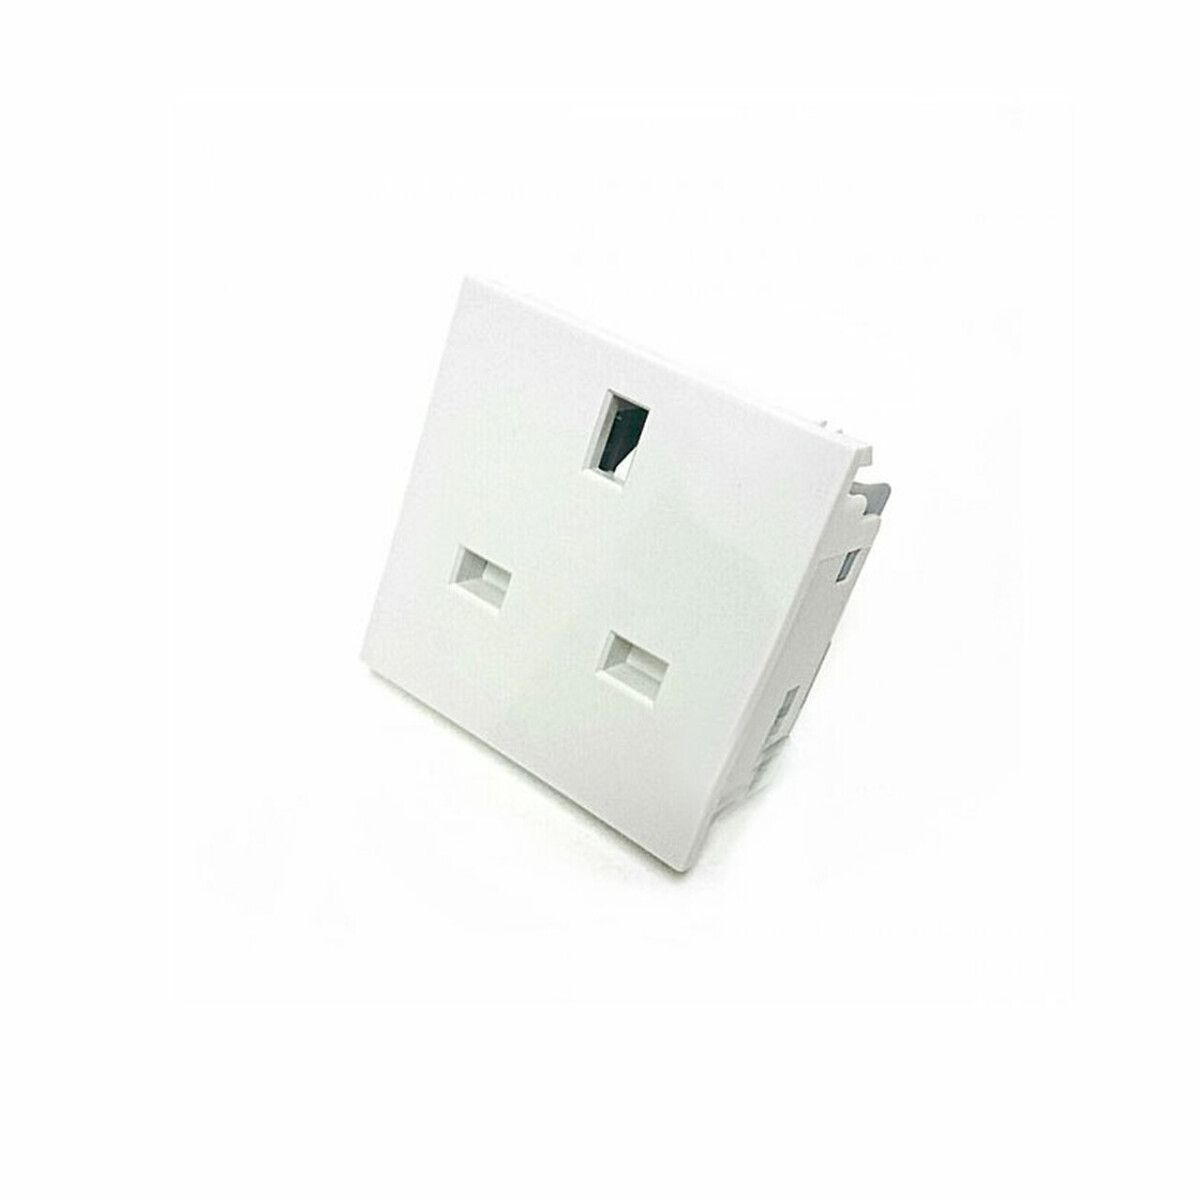 bg-electrical-emuksw-euro-module-13-amp-uk-3-pin-unswitched-socket-in-white-p3725-6648_zoom__56481.1611334418__74716.1612864183